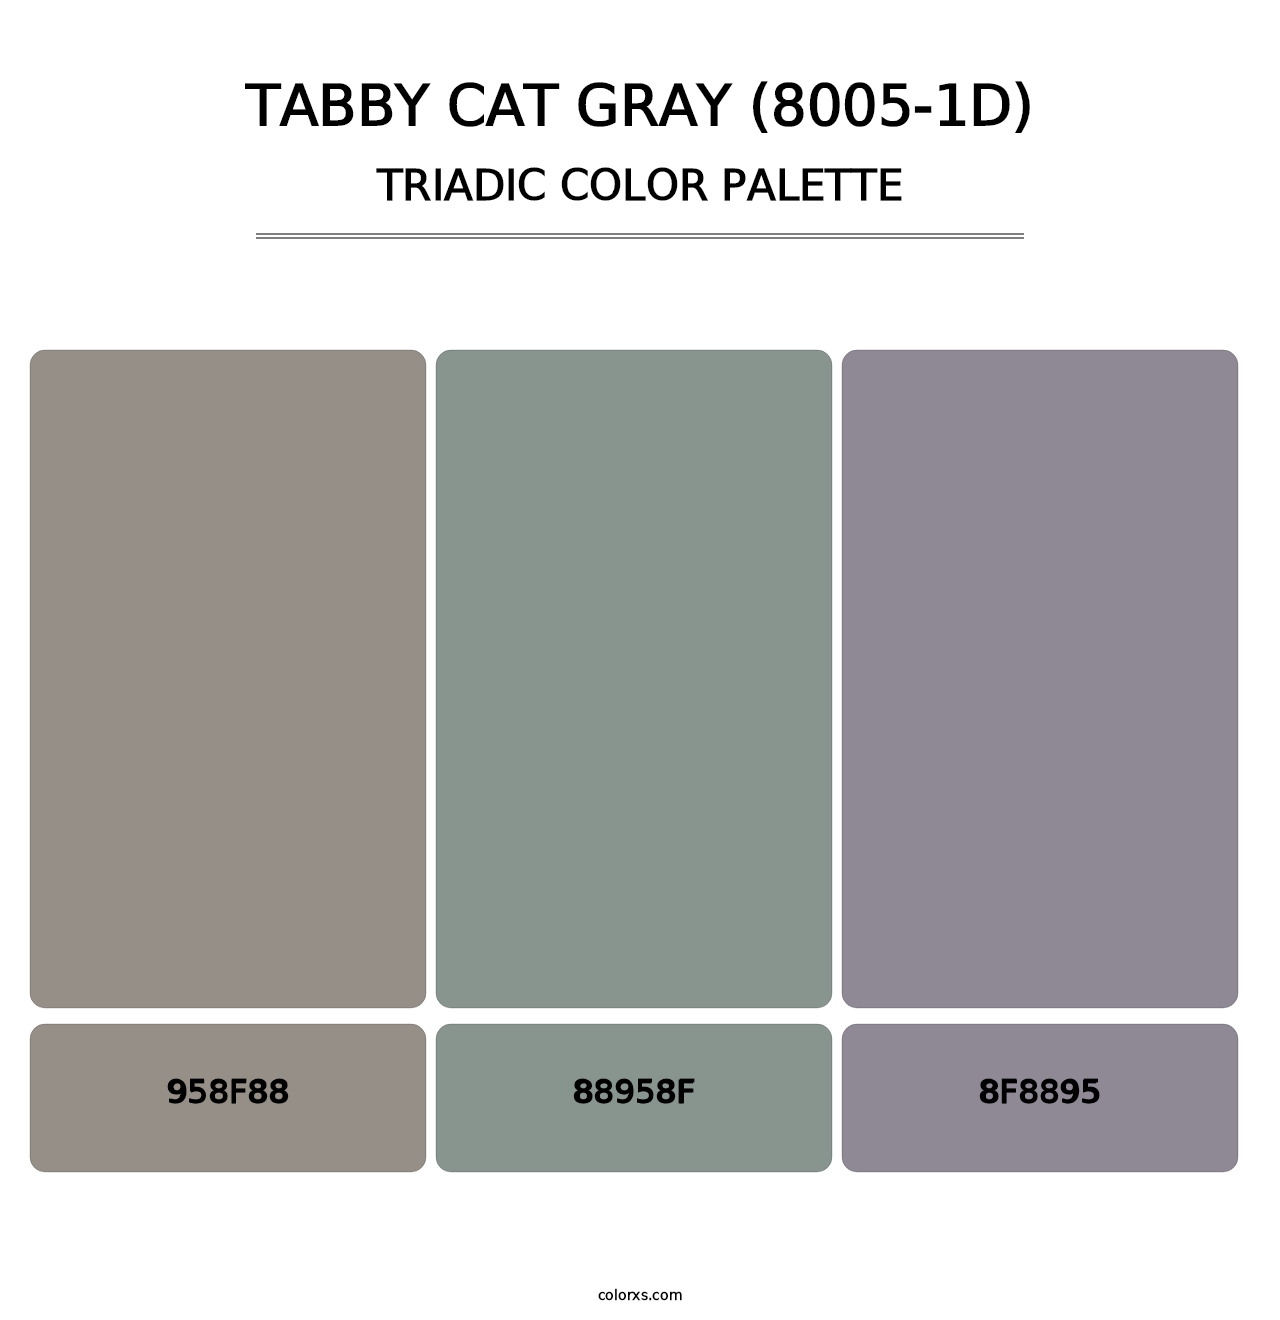 Tabby Cat Gray (8005-1D) - Triadic Color Palette